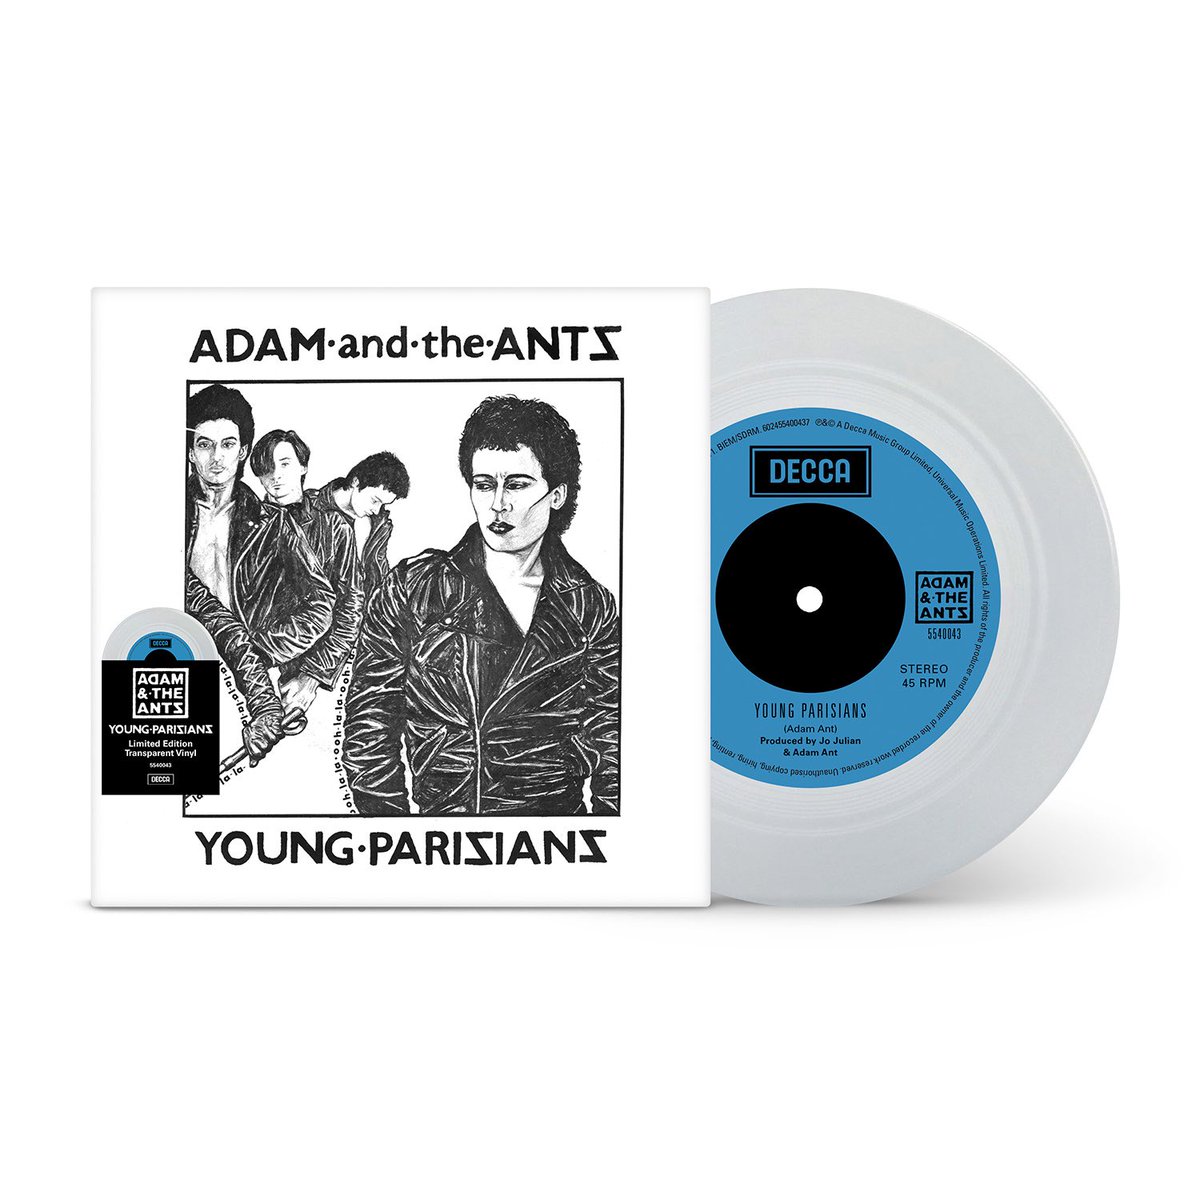 Young Parisians is set for reissue next month. Preorder from DECCA records. Check the Official Adam Ant Facebook page for details